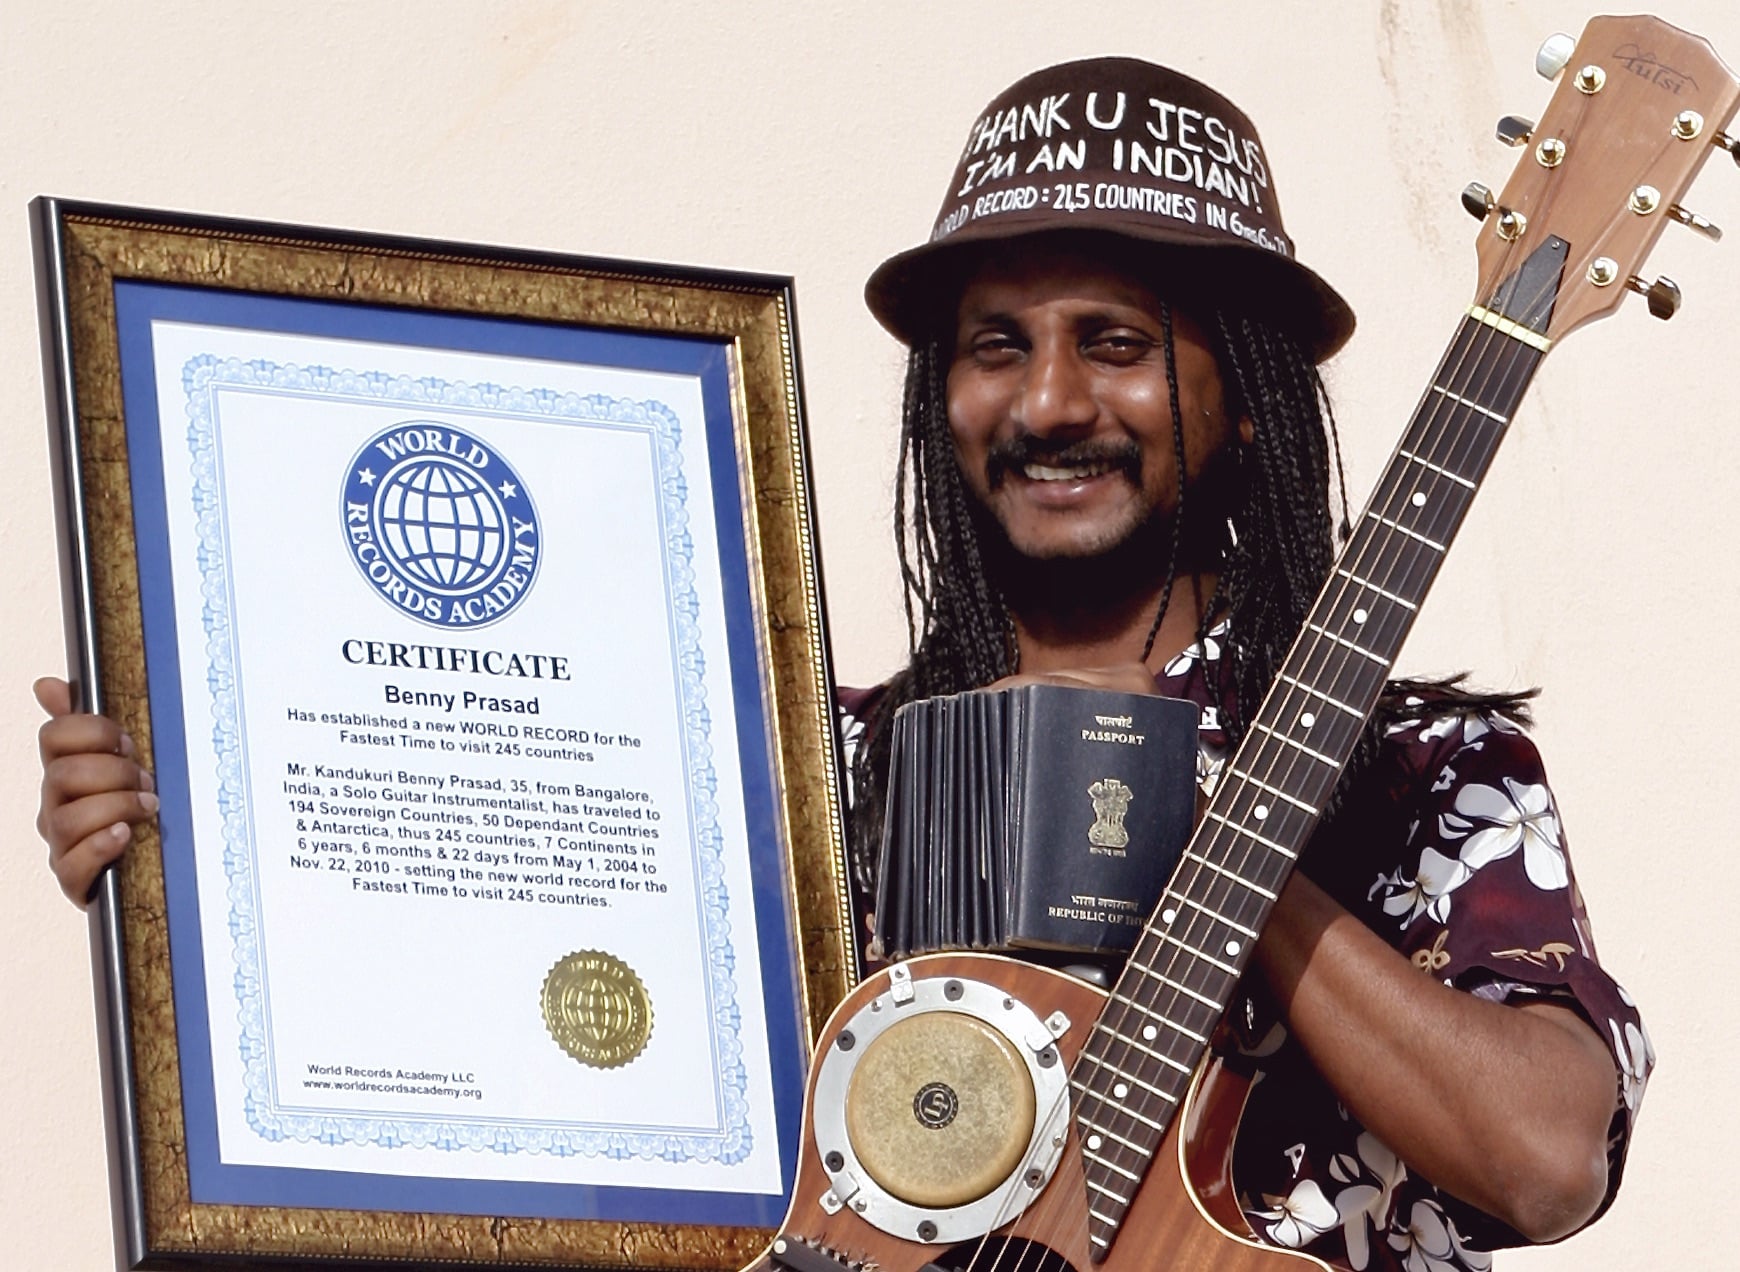 Benny Prasad, an Indian traveller who visited every country in the world holding a certificate for his achievements from the World Records Academy and all his passports 